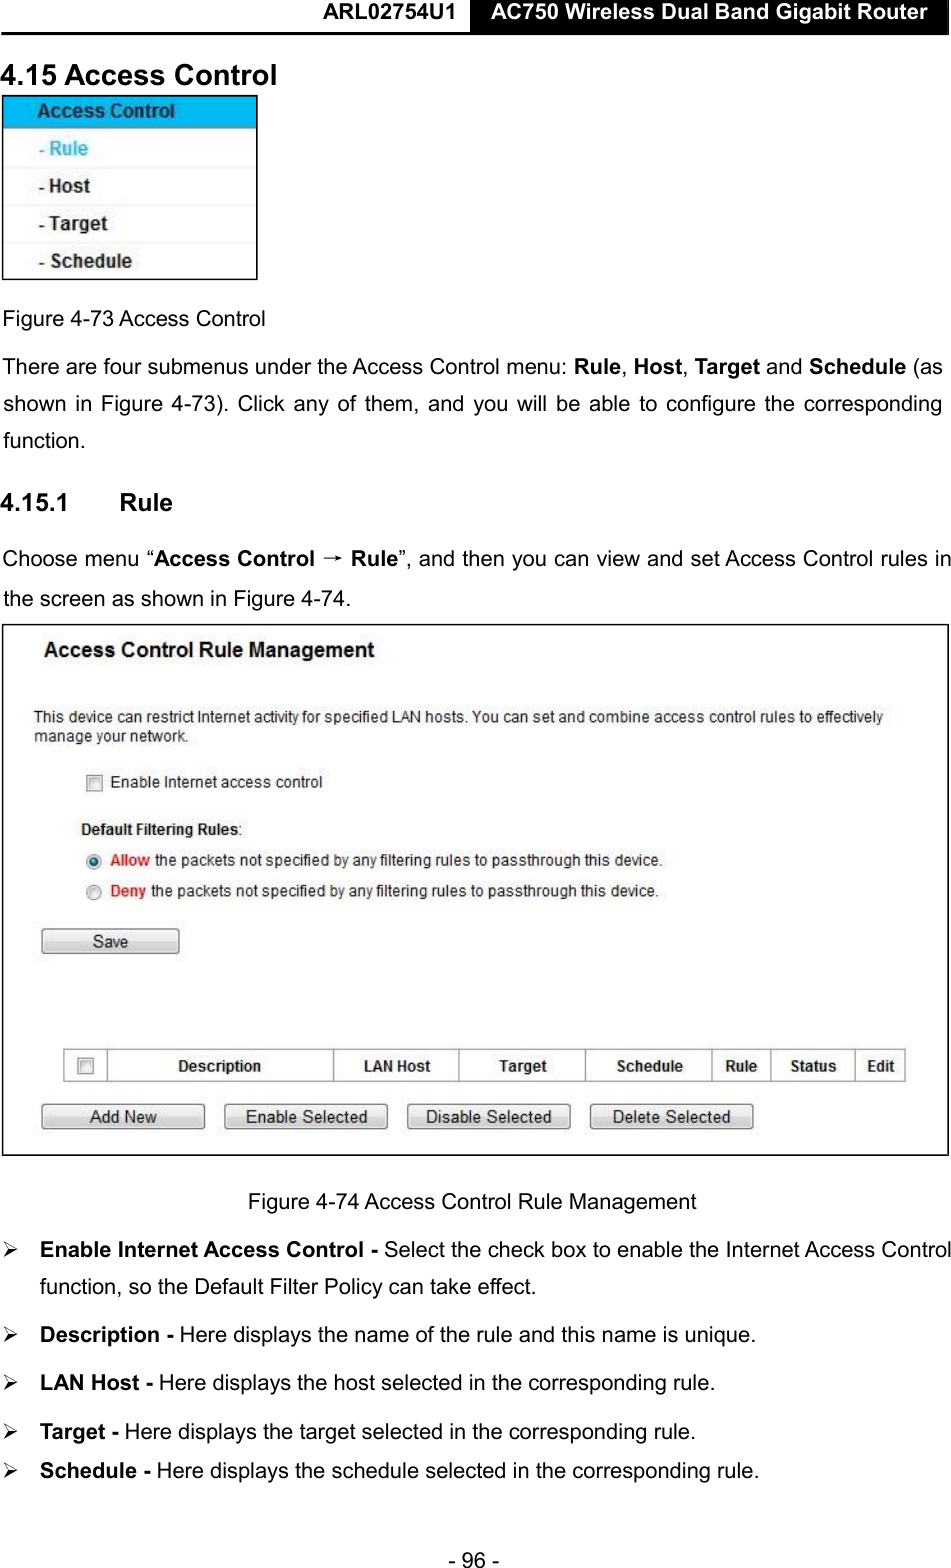  ARL02754U1  AC750 Wireless Dual Band Gigabit Router    - 96 -  4.15 Access Control   Figure 4-73 Access Control  There are four submenus under the Access Control menu: Rule, Host, Target and Schedule (as shown in Figure 4-73). Click any of them, and you will be able to configure the corresponding function.  4.15.1  Rule  Choose menu “Access Control → Rule”, and then you can view and set Access Control rules in the screen as shown in Figure 4-74.    Figure 4-74 Access Control Rule Management   Enable Internet Access Control - Select the check box to enable the Internet Access Control function, so the Default Filter Policy can take effect.    Description - Here displays the name of the rule and this name is unique.    LAN Host - Here displays the host selected in the corresponding rule.    Target - Here displays the target selected in the corresponding rule.    Schedule - Here displays the schedule selected in the corresponding rule.       